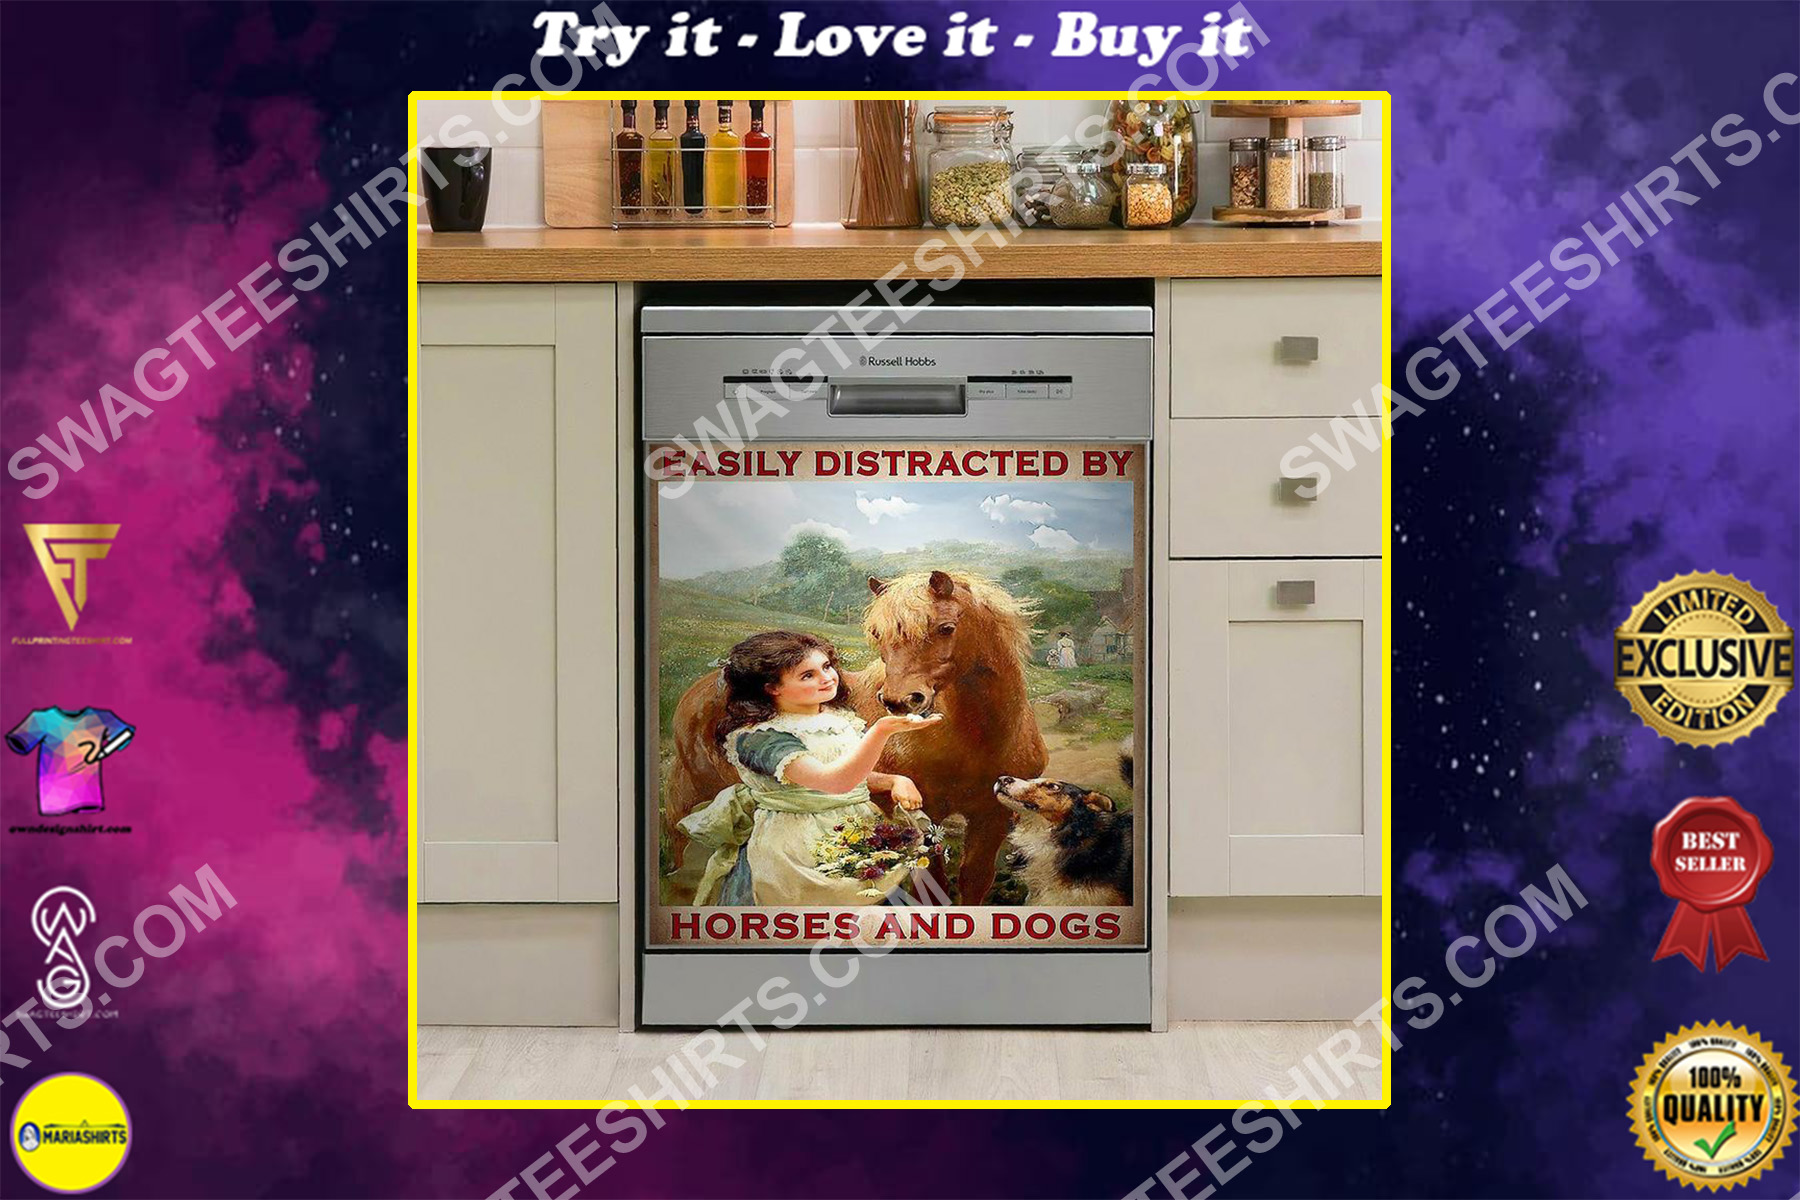 horses and dogs kitchen decorative dishwasher magnet cover